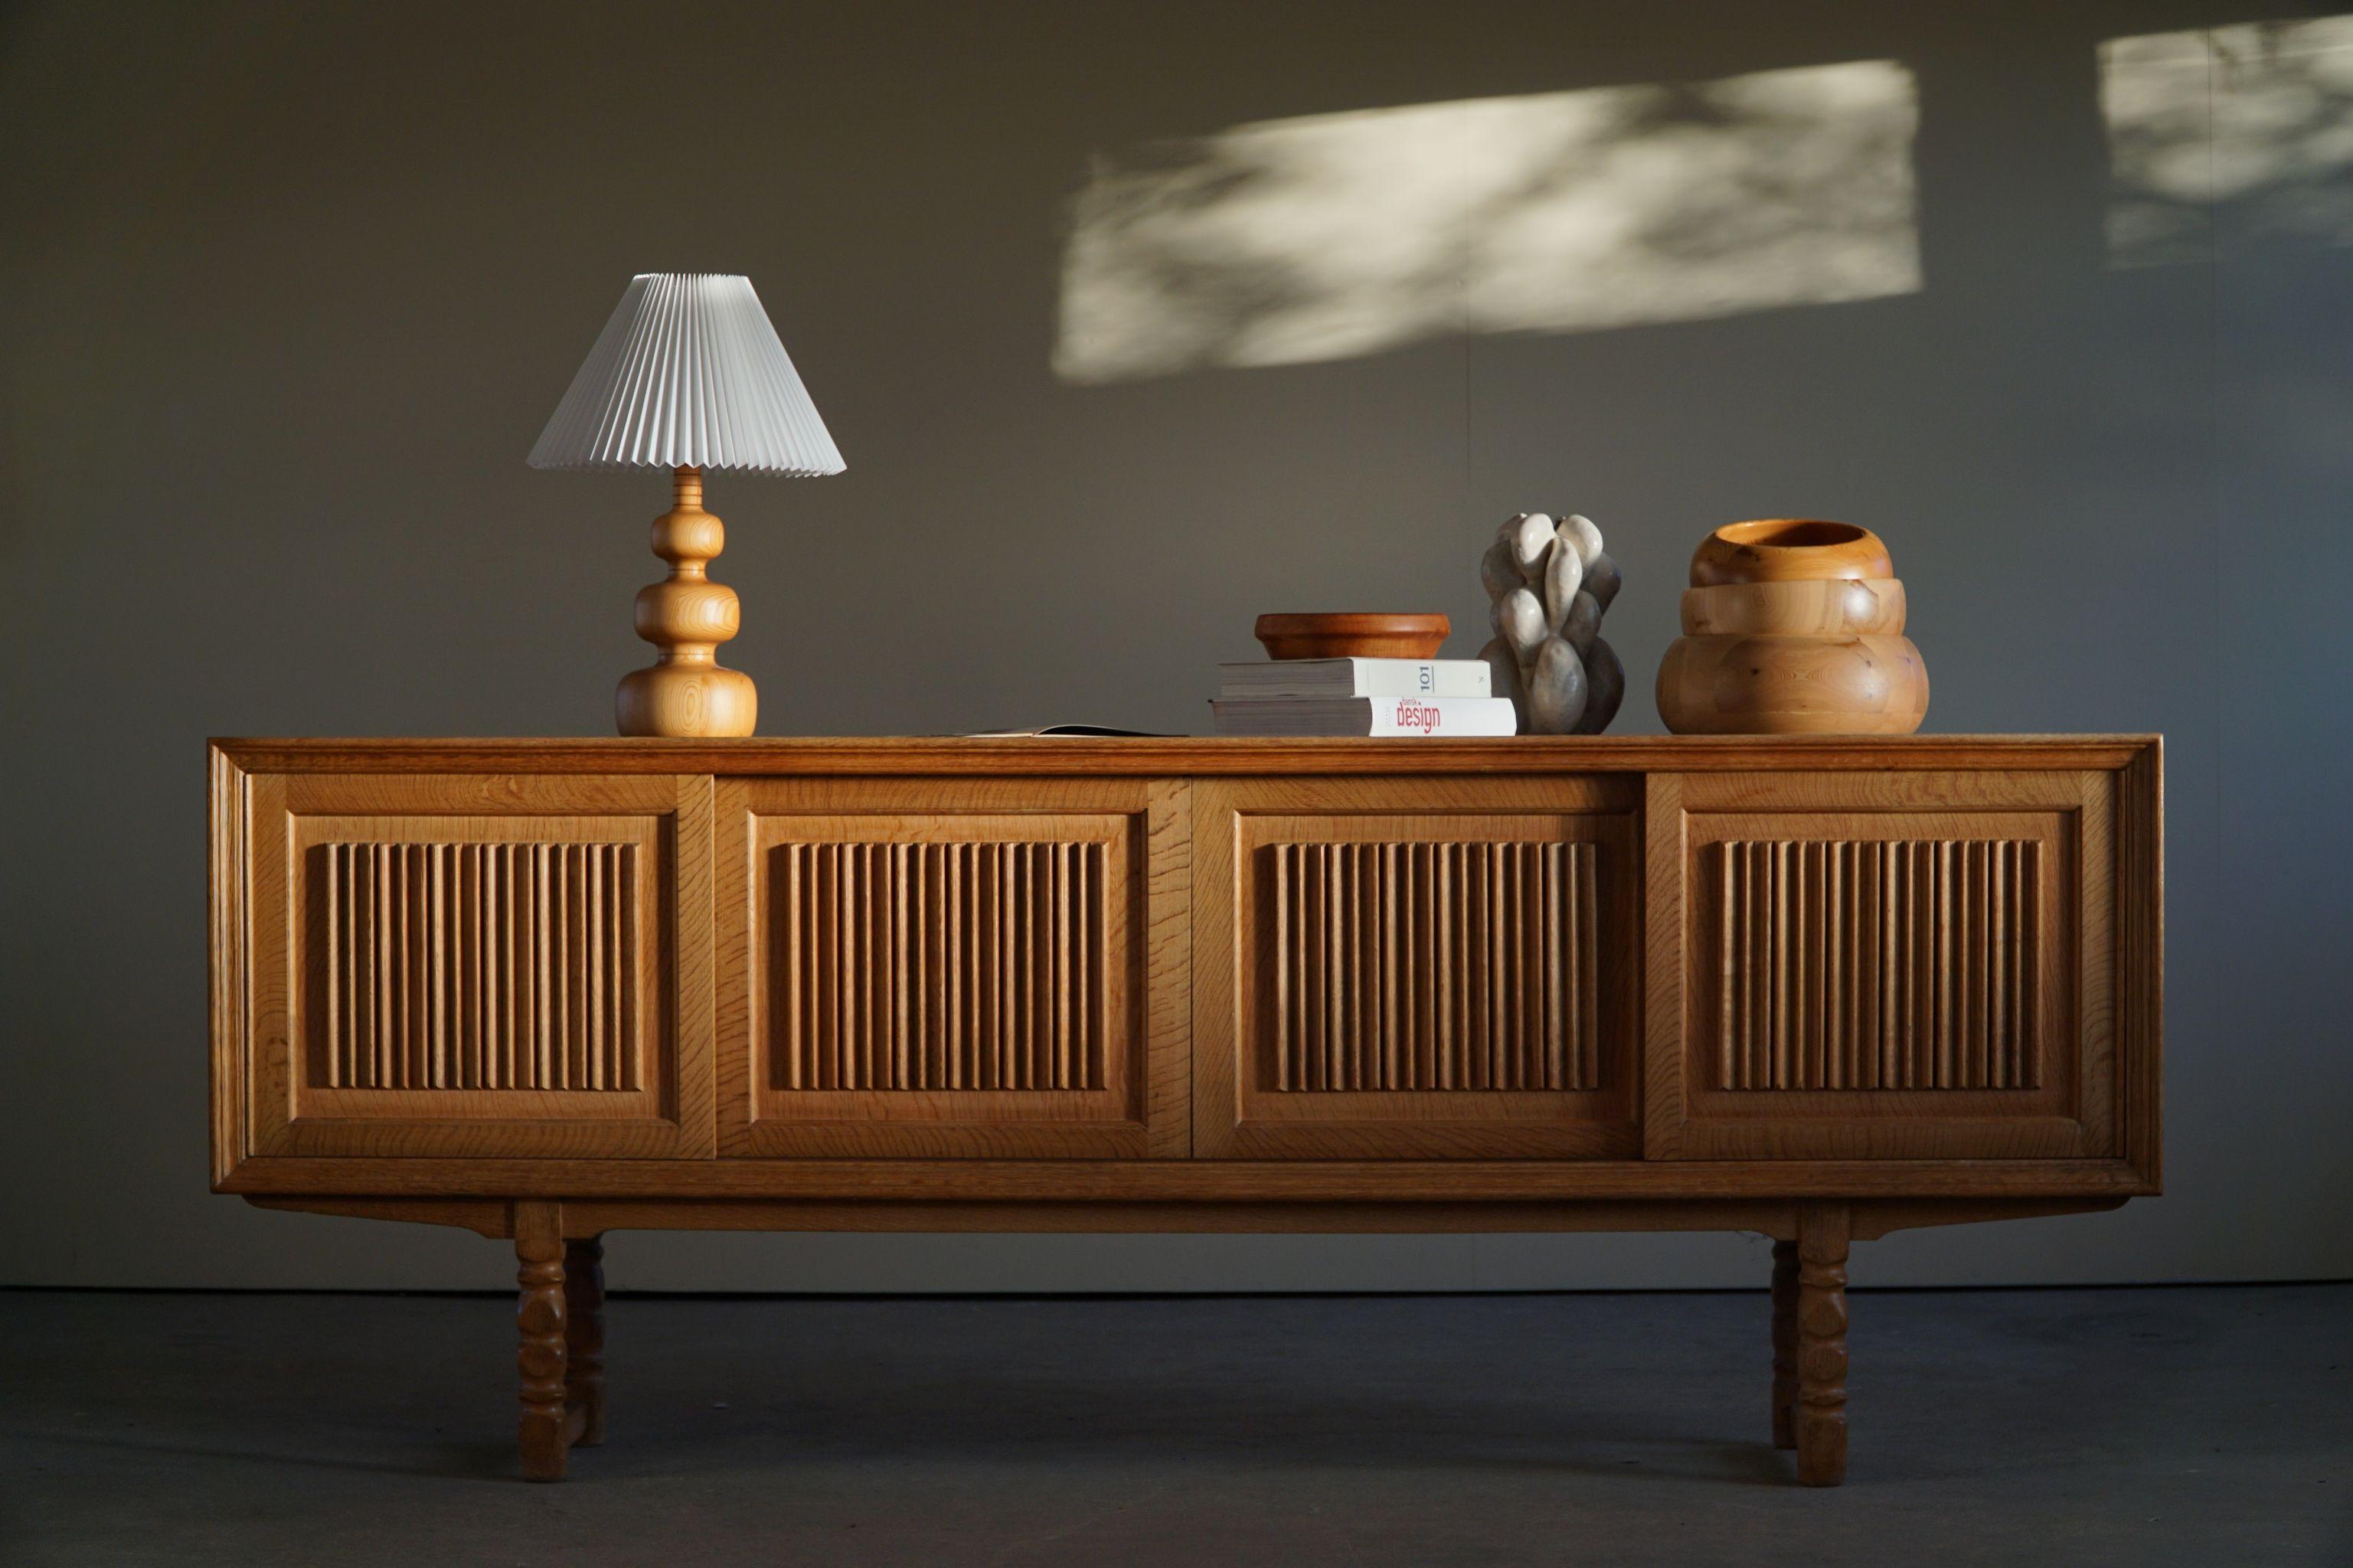 Danish Modern rectangular sideboard, made in oak, ca 1950s.

A great patina and a nice sculptural front design. 

With a heavy focus on functionality, this design style leans toward modernism, while incorporating coziness. The Scandinavian